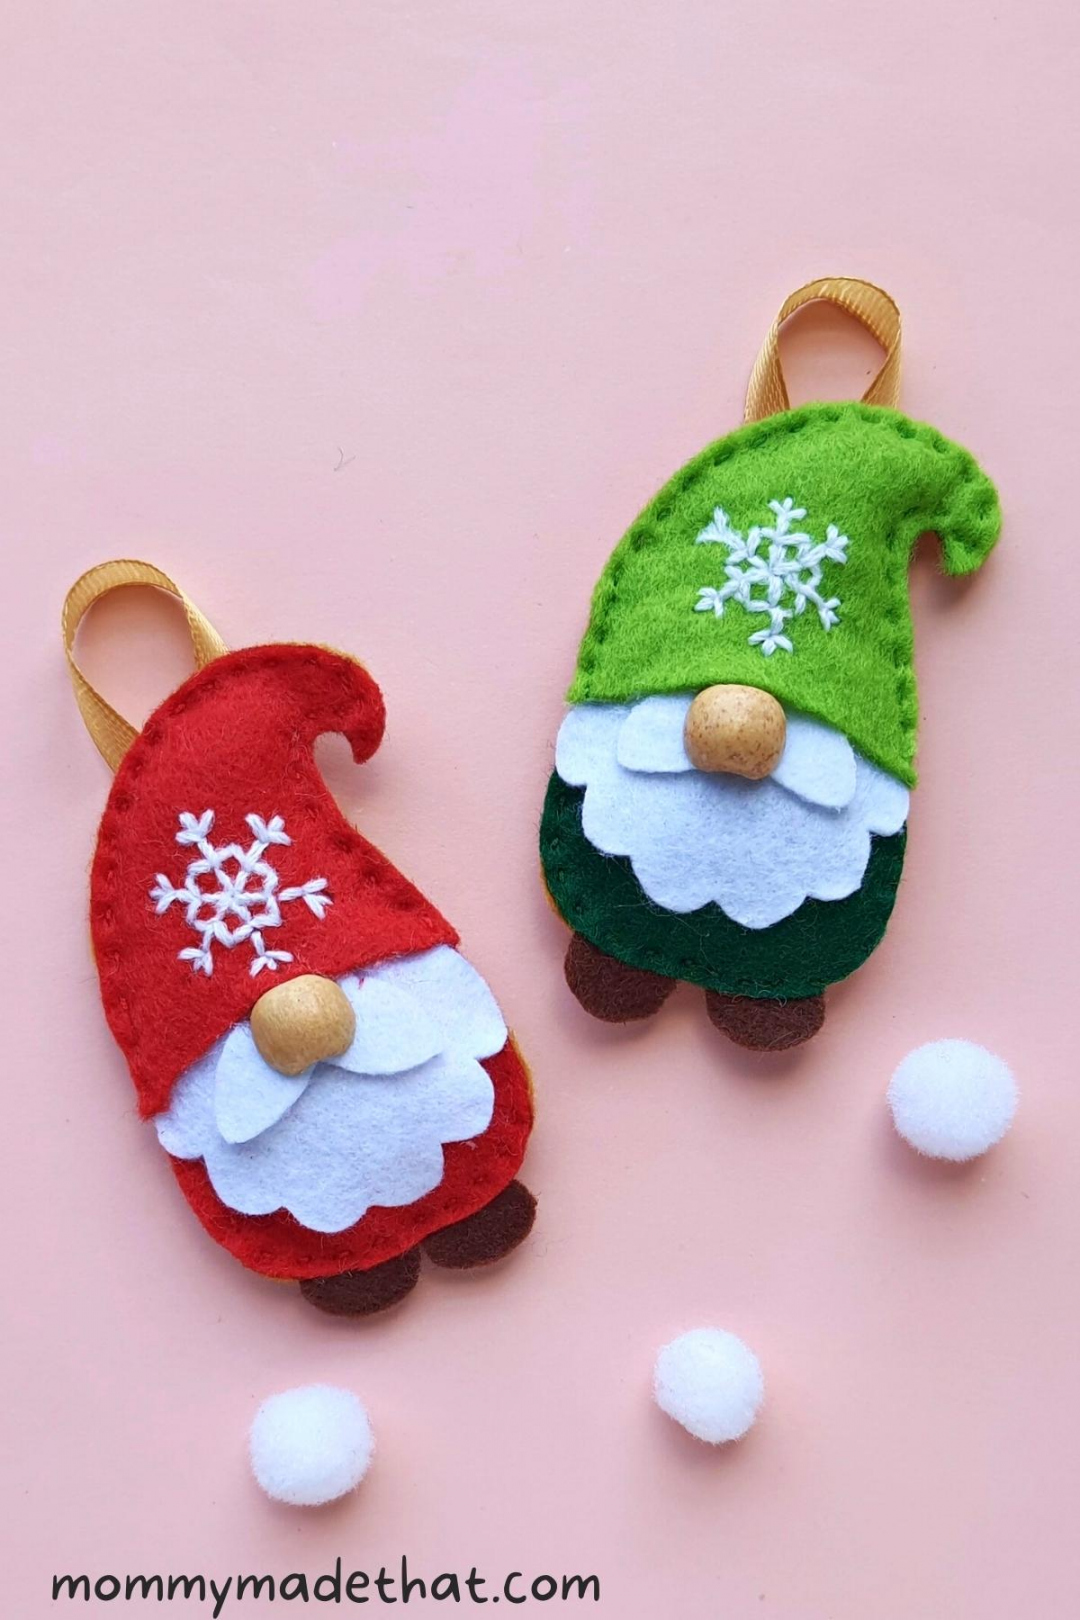 The Cutest DIY Felt Ornaments (With Free Patterns)